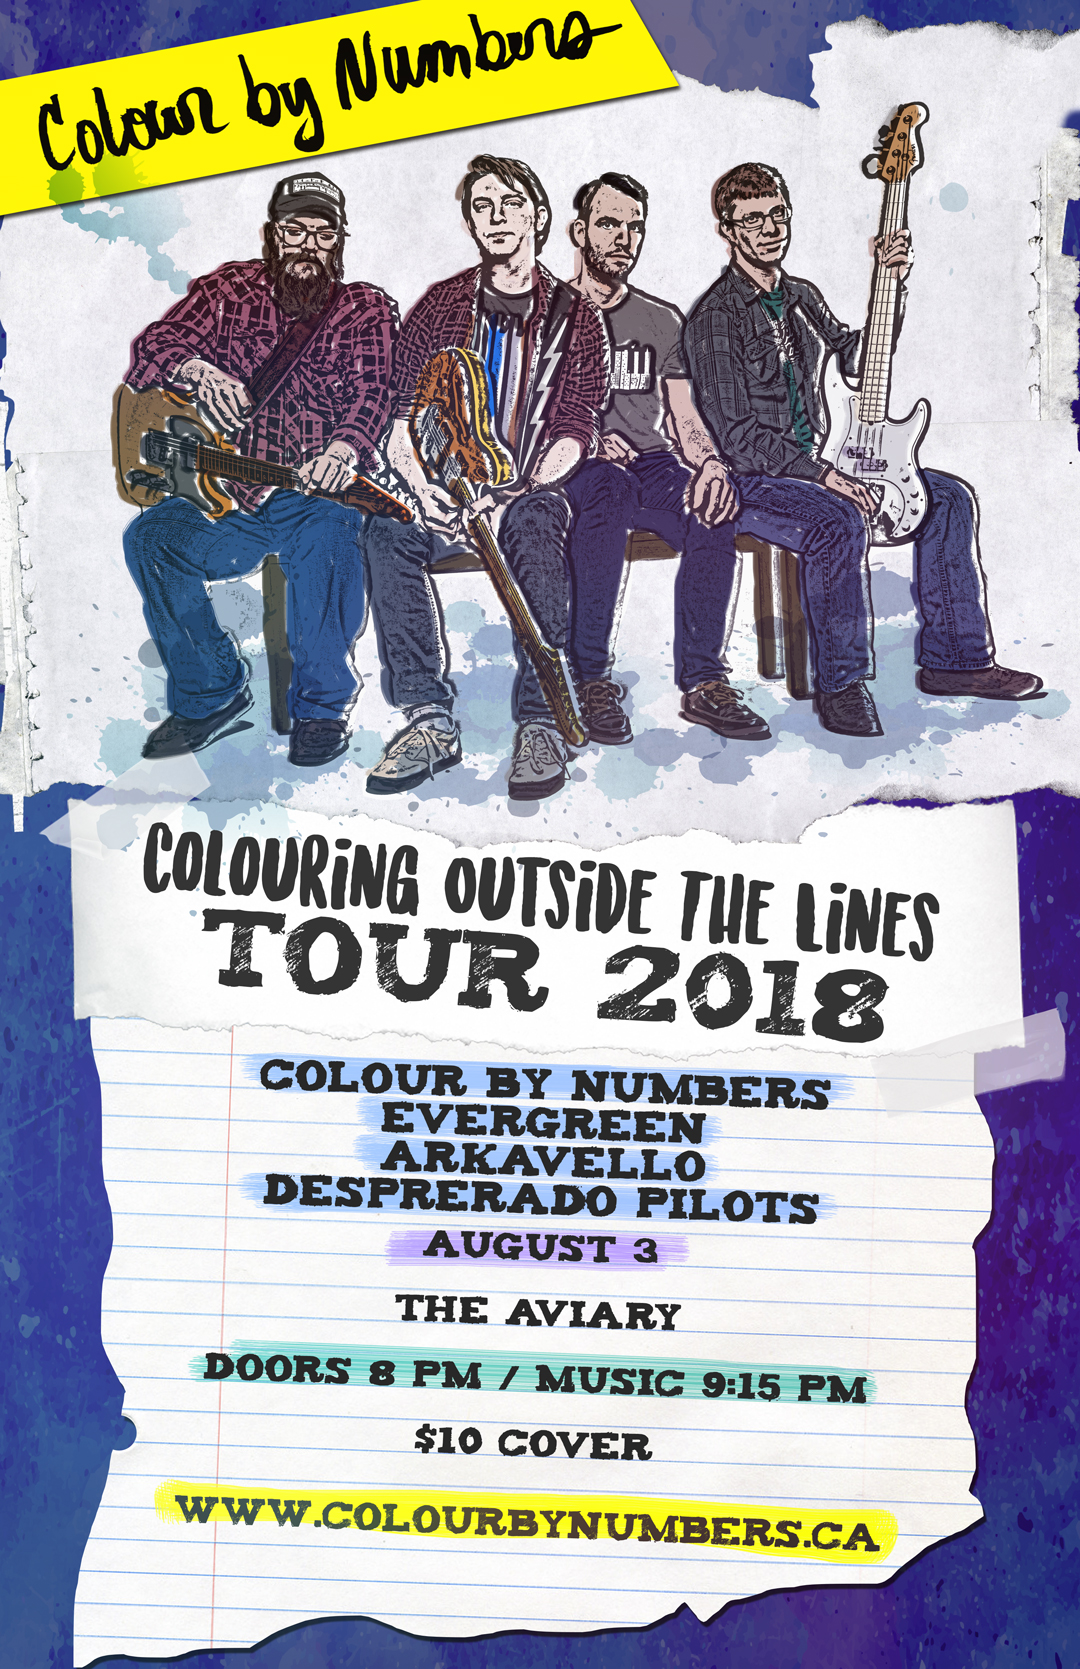 Colour By Numbers “Colouring Outside The Lines” Tour - image